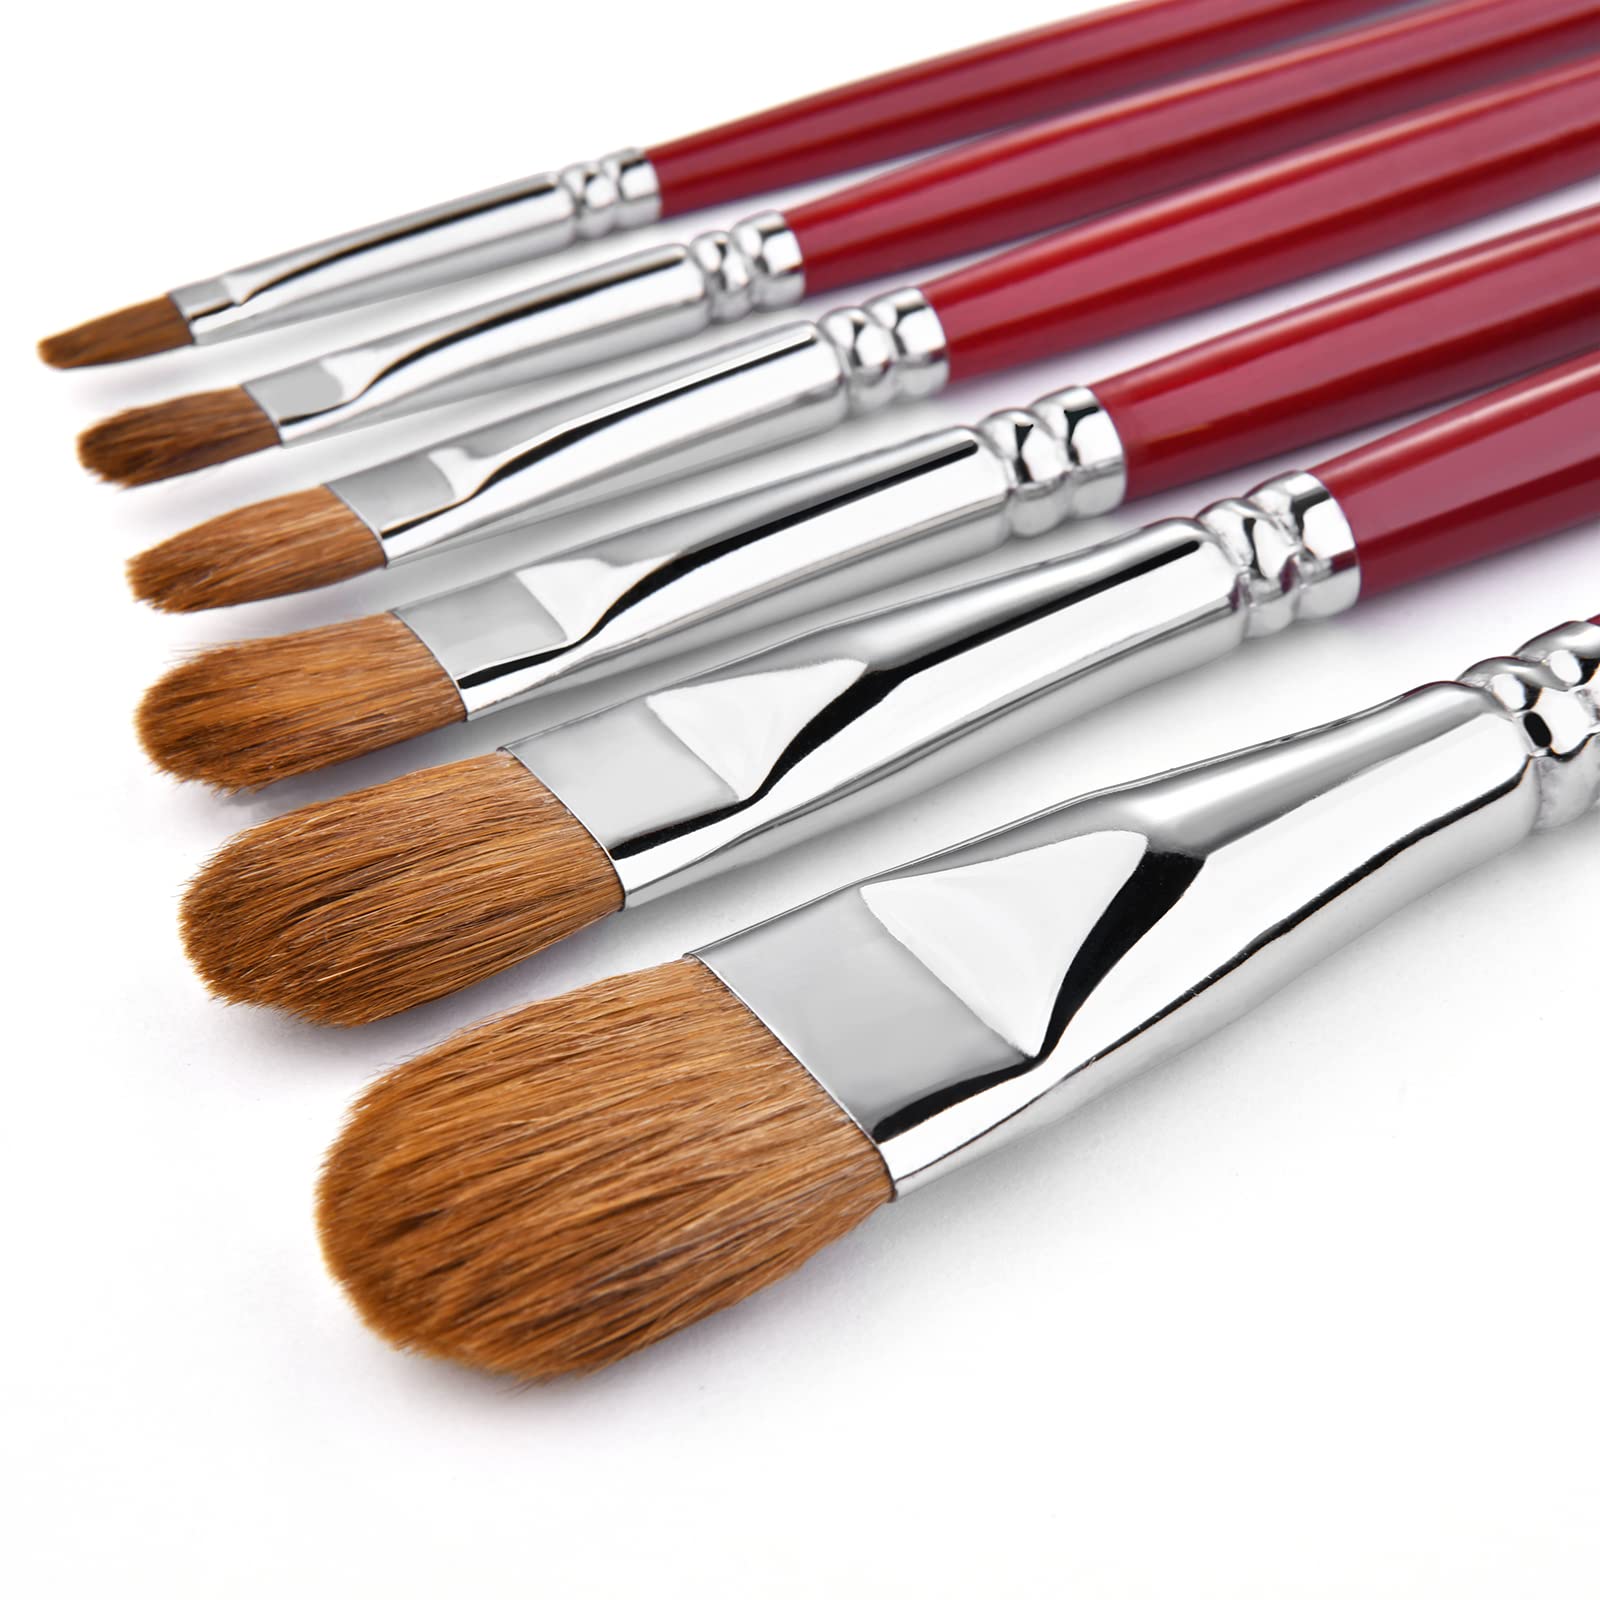 Red Sable Filbert Paint Brushes - Set of 6 Acrylic, Watercolor, Mixed Media or O